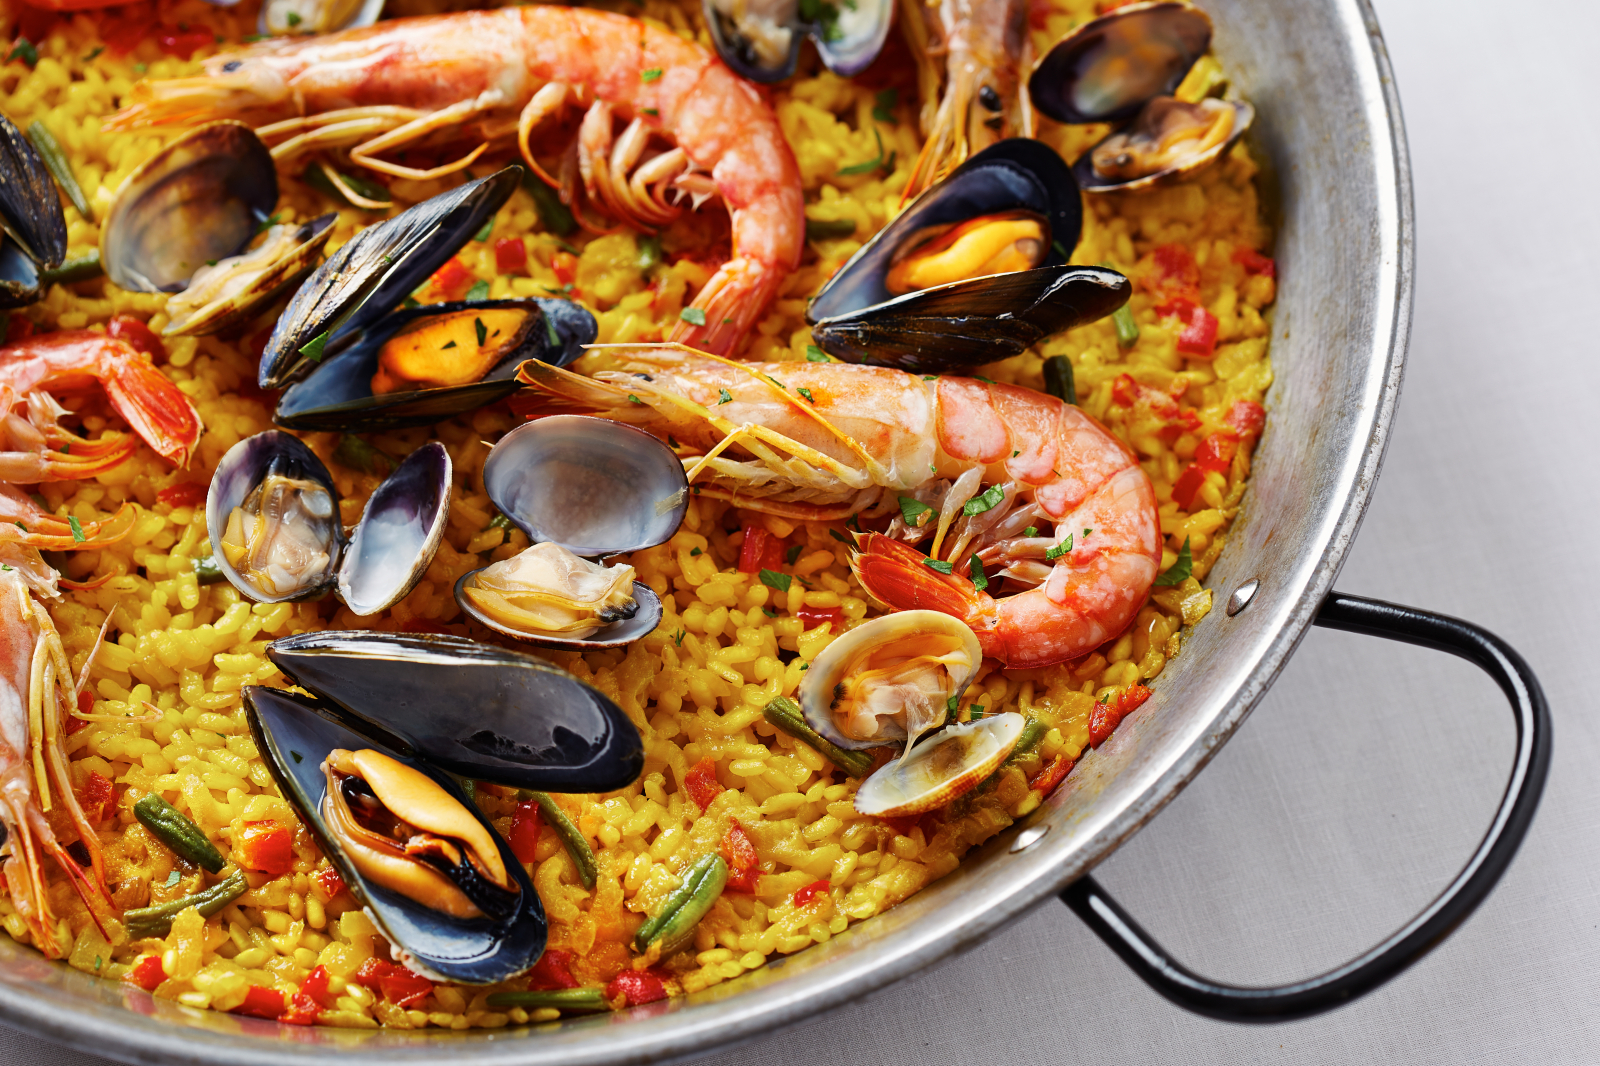 paella-what-to-eat-in-spain-spanish-food-jintravel.com